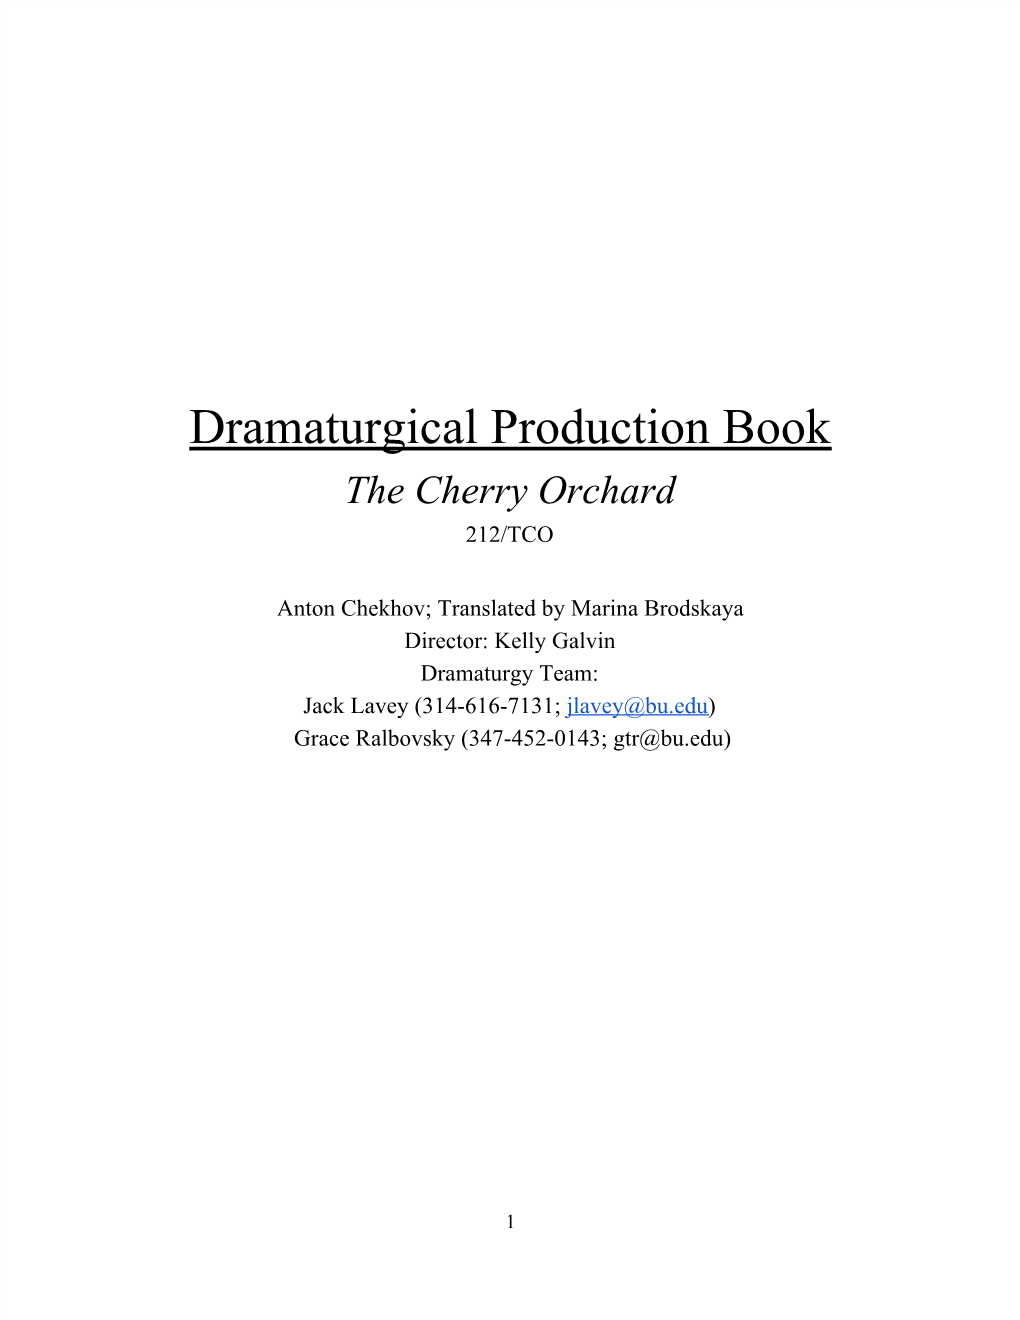 The Cherry Orchard 212/TCO